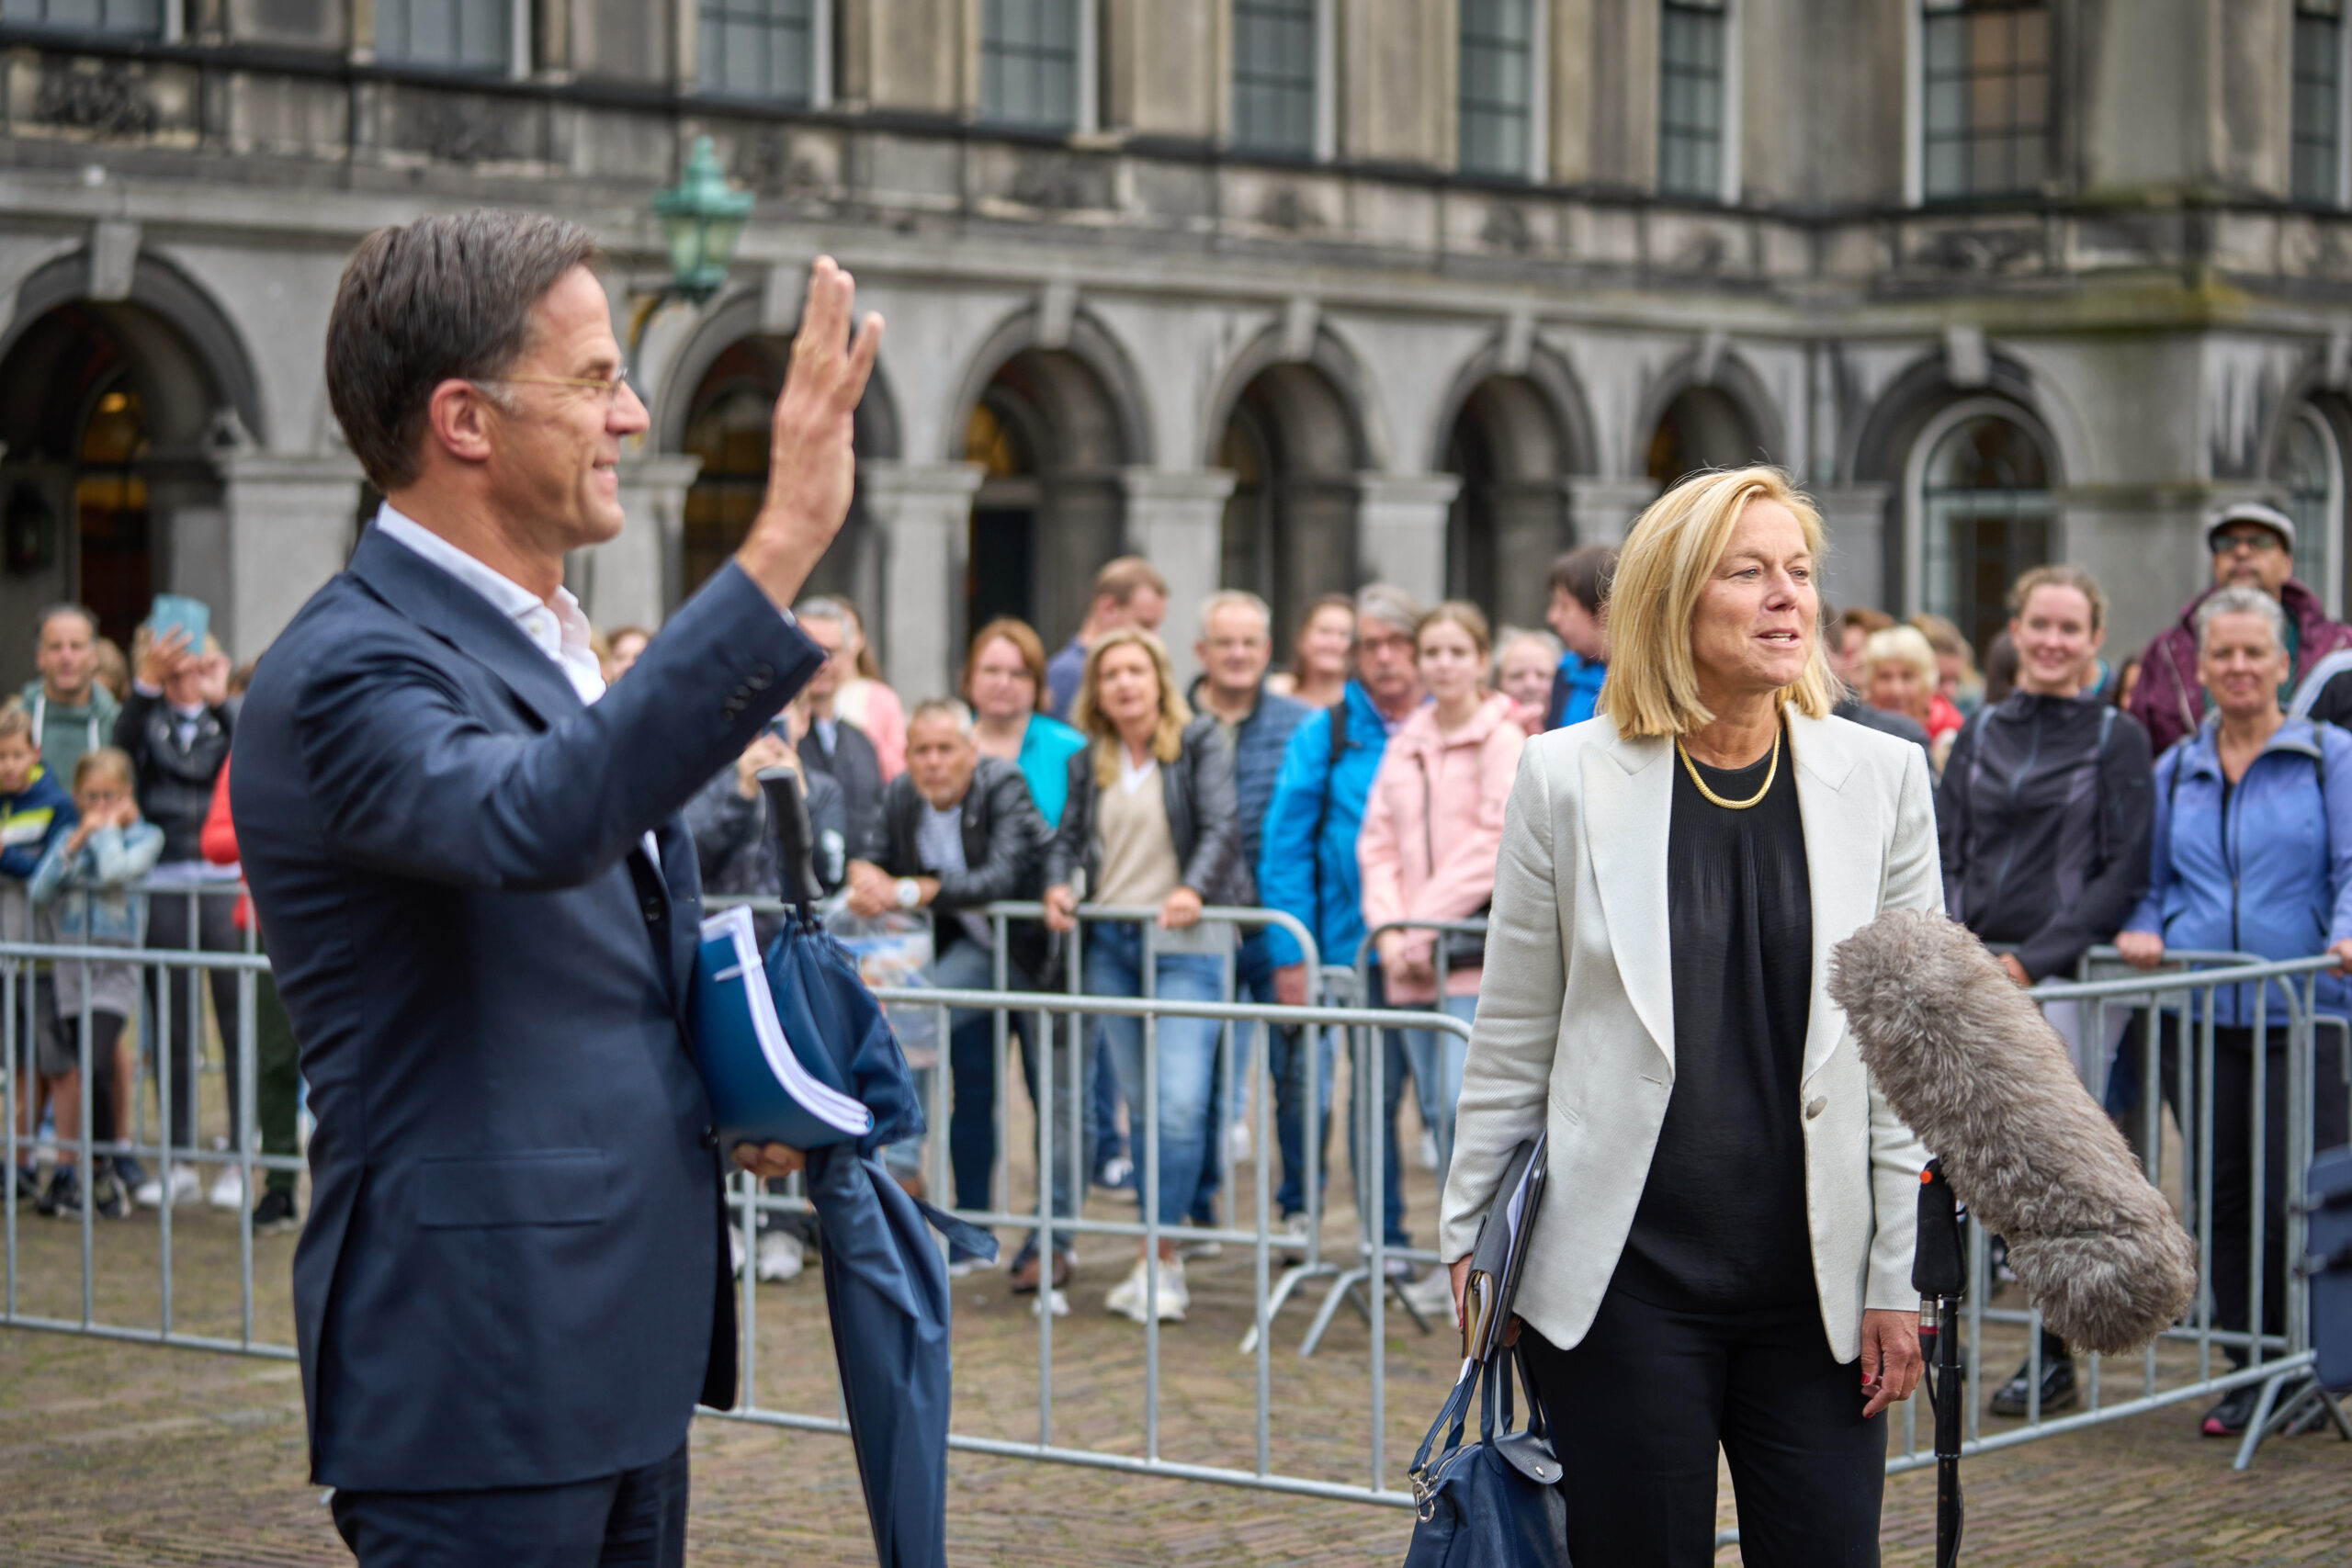 Root and Kaag discuss merger of PvdA and GroenLinks political groups